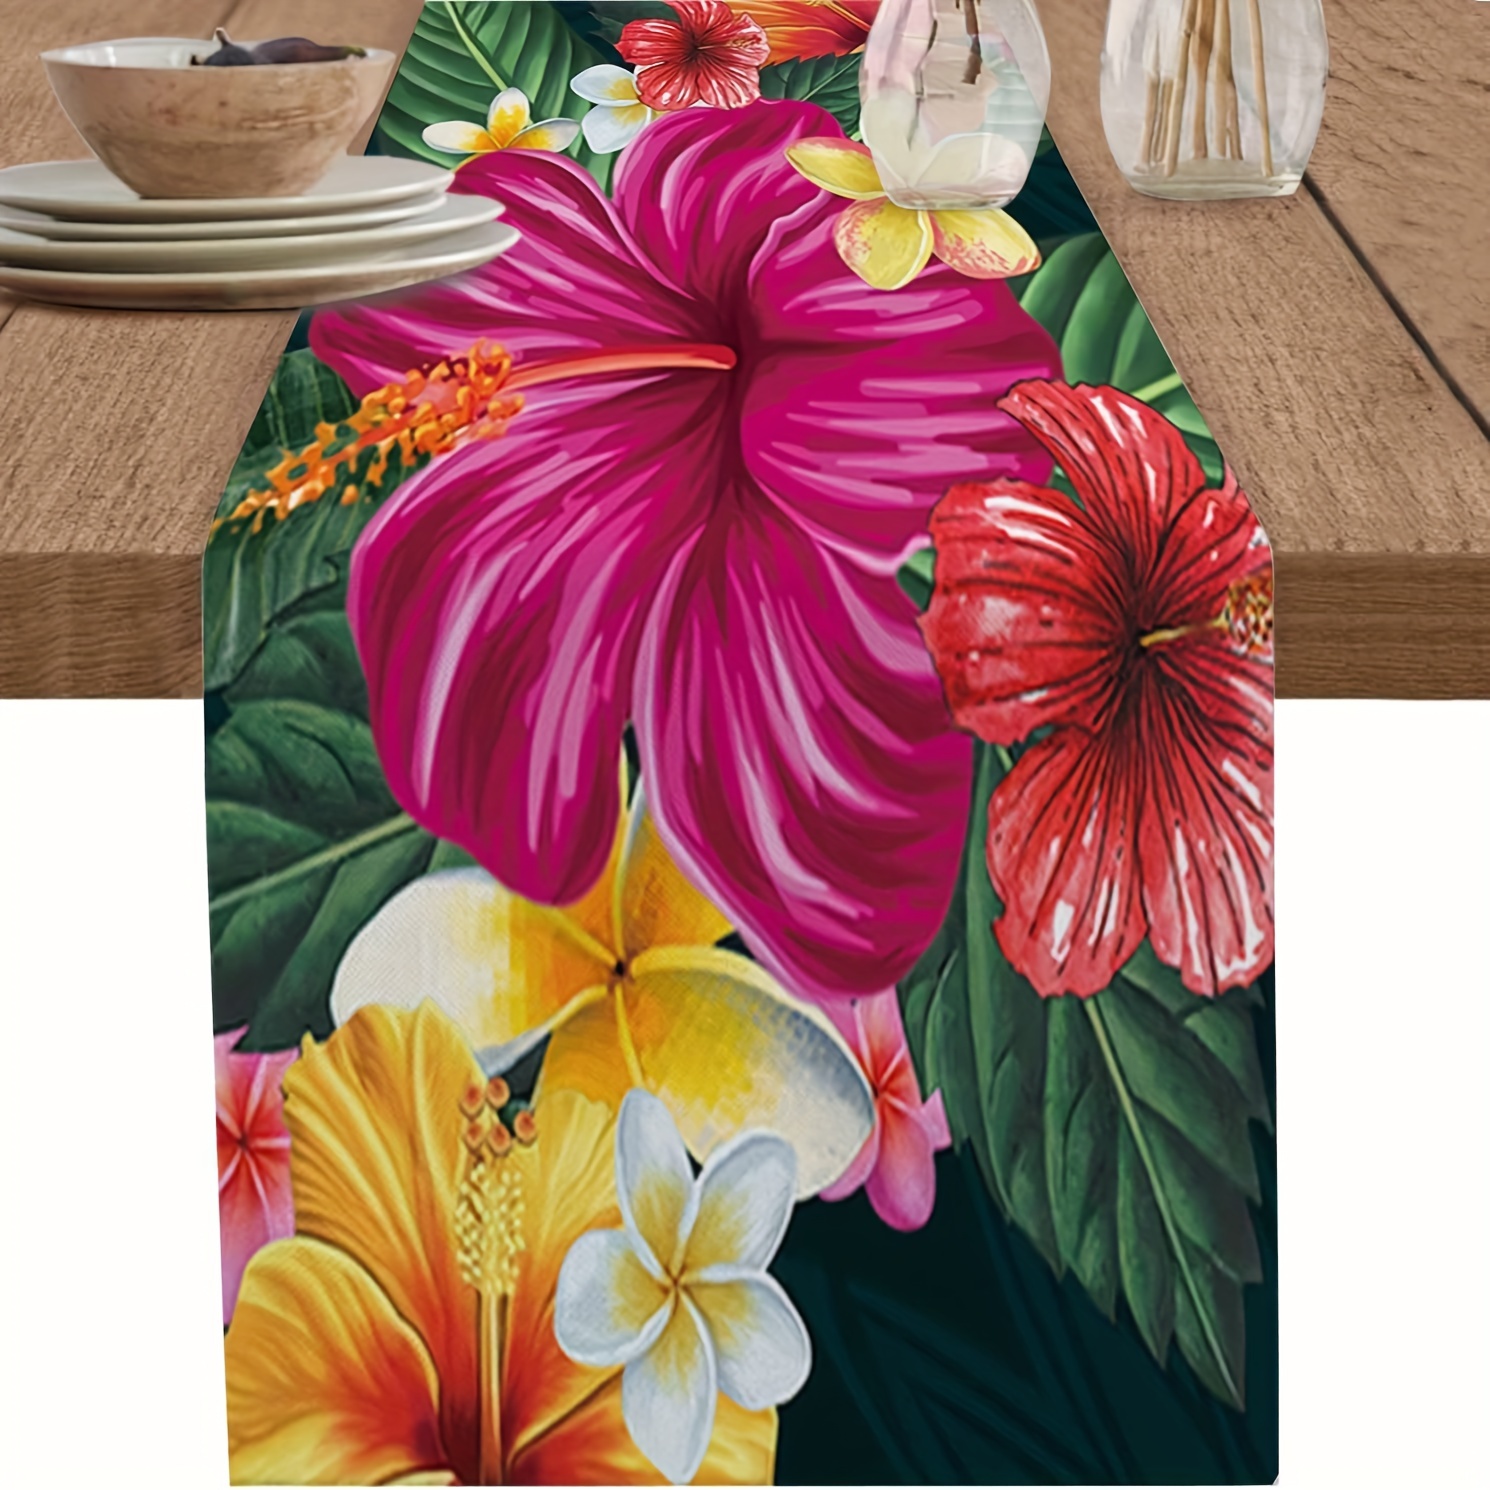 

Linen Table Runner 13x72 Inches - Woven Rectangle Floral Hibiscus Plumeria Rubra Design For Kitchen Dining Decor, Family Gatherings, Parties, And Wedding Table Decorations - 1pc